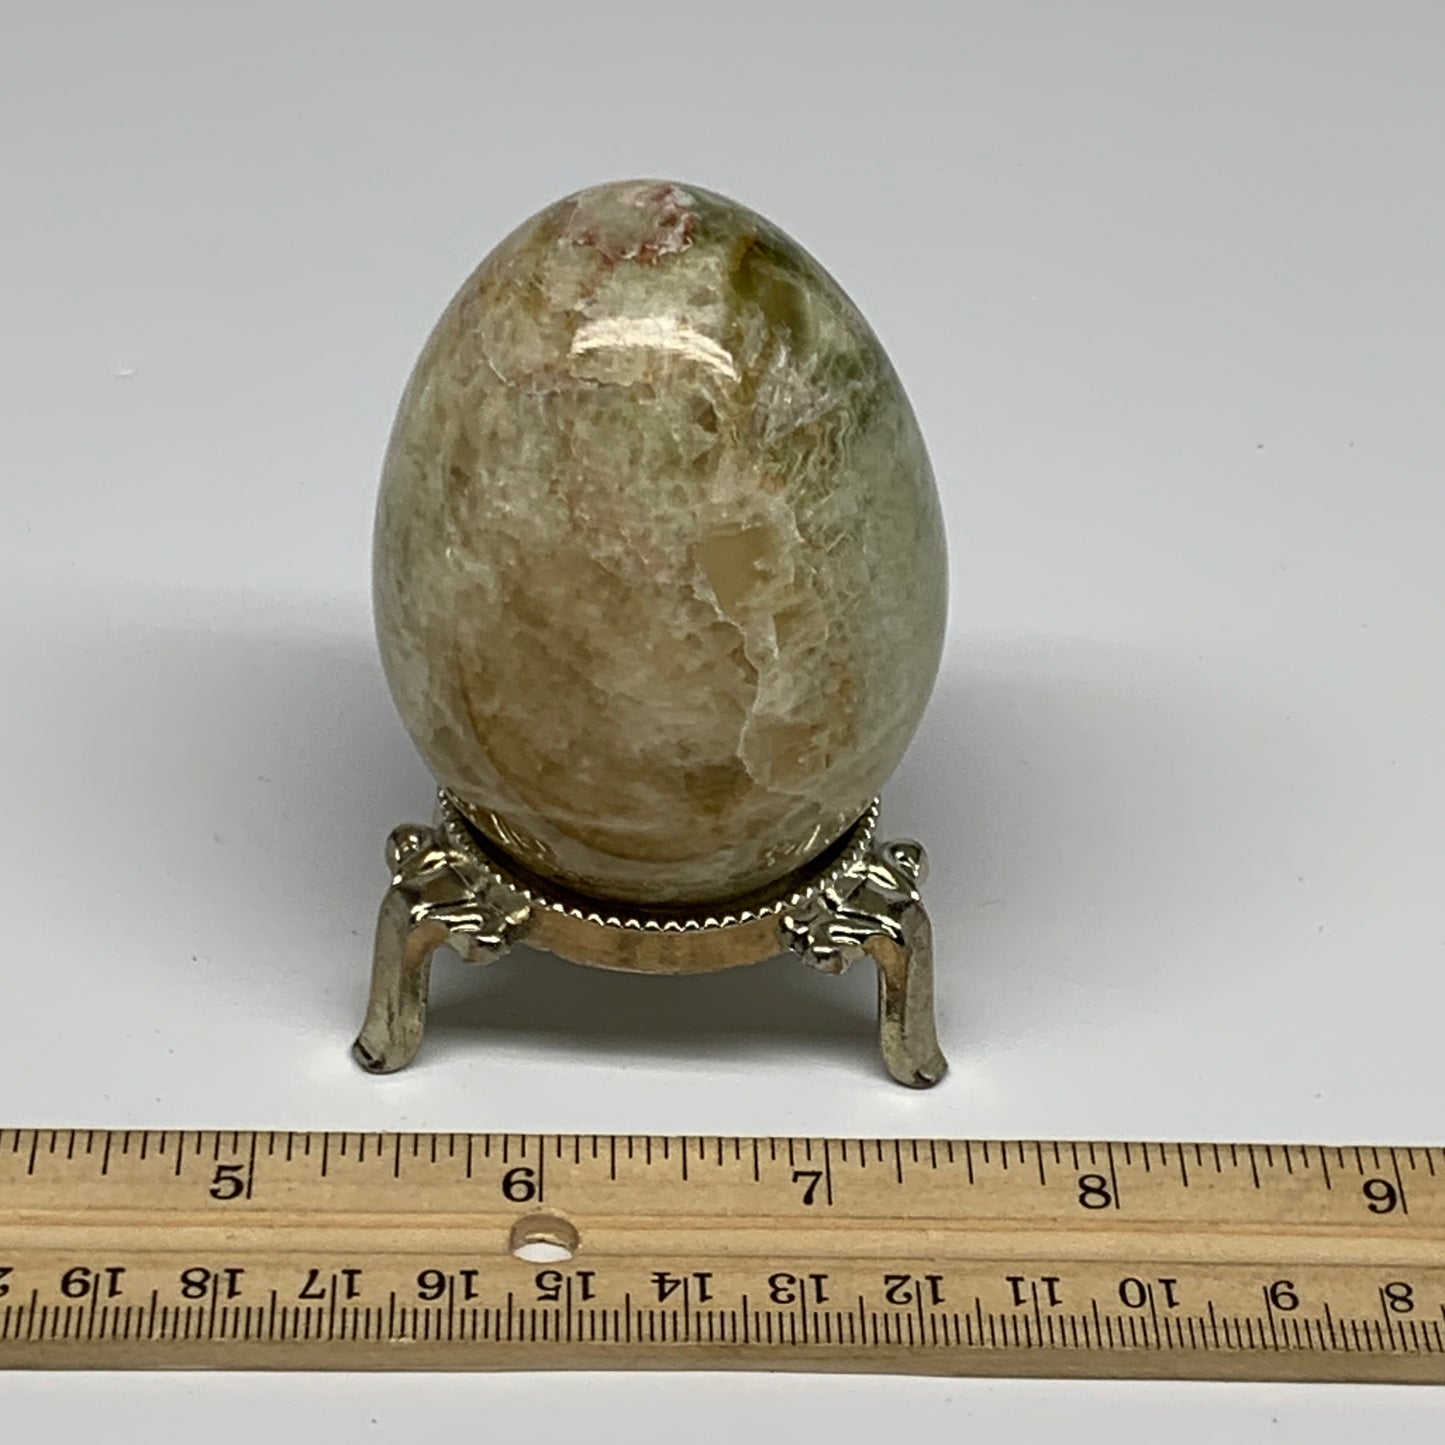 263g, 2.7"x2" Natural Green Onyx Egg Gemstone Mineral, from Pakistan, B32041